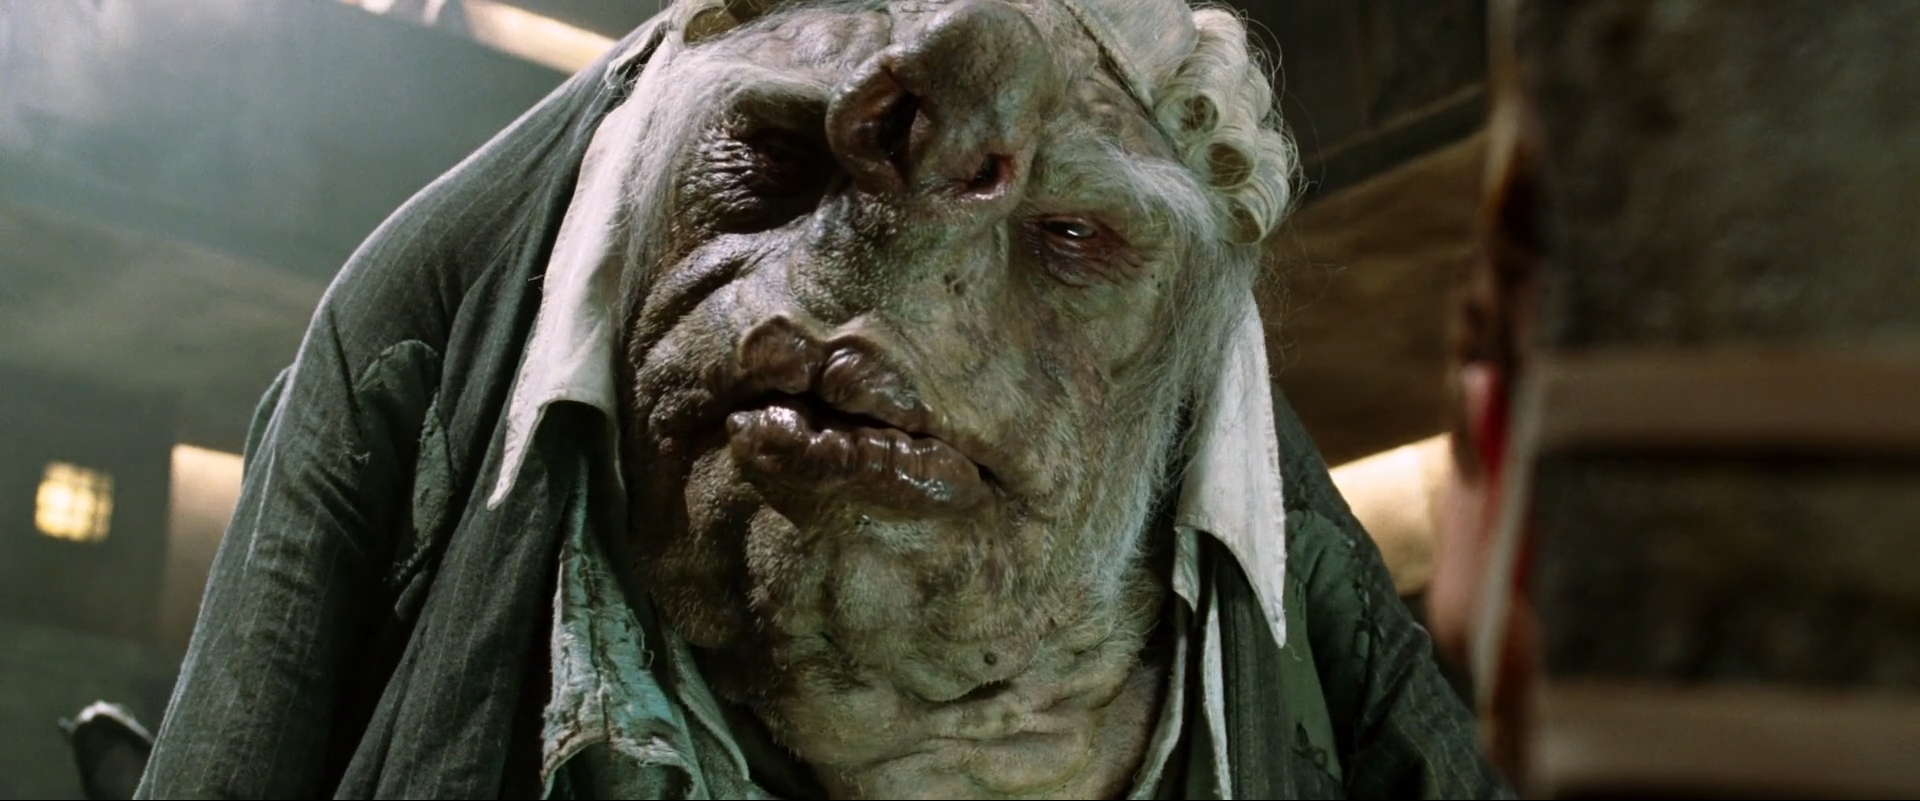 Screenshot from the movie The HitchHicker's Guide to the Galaxy, showing a Vogon; a really ugly alien race known for their love of bureaucracy and their poor poetry skills